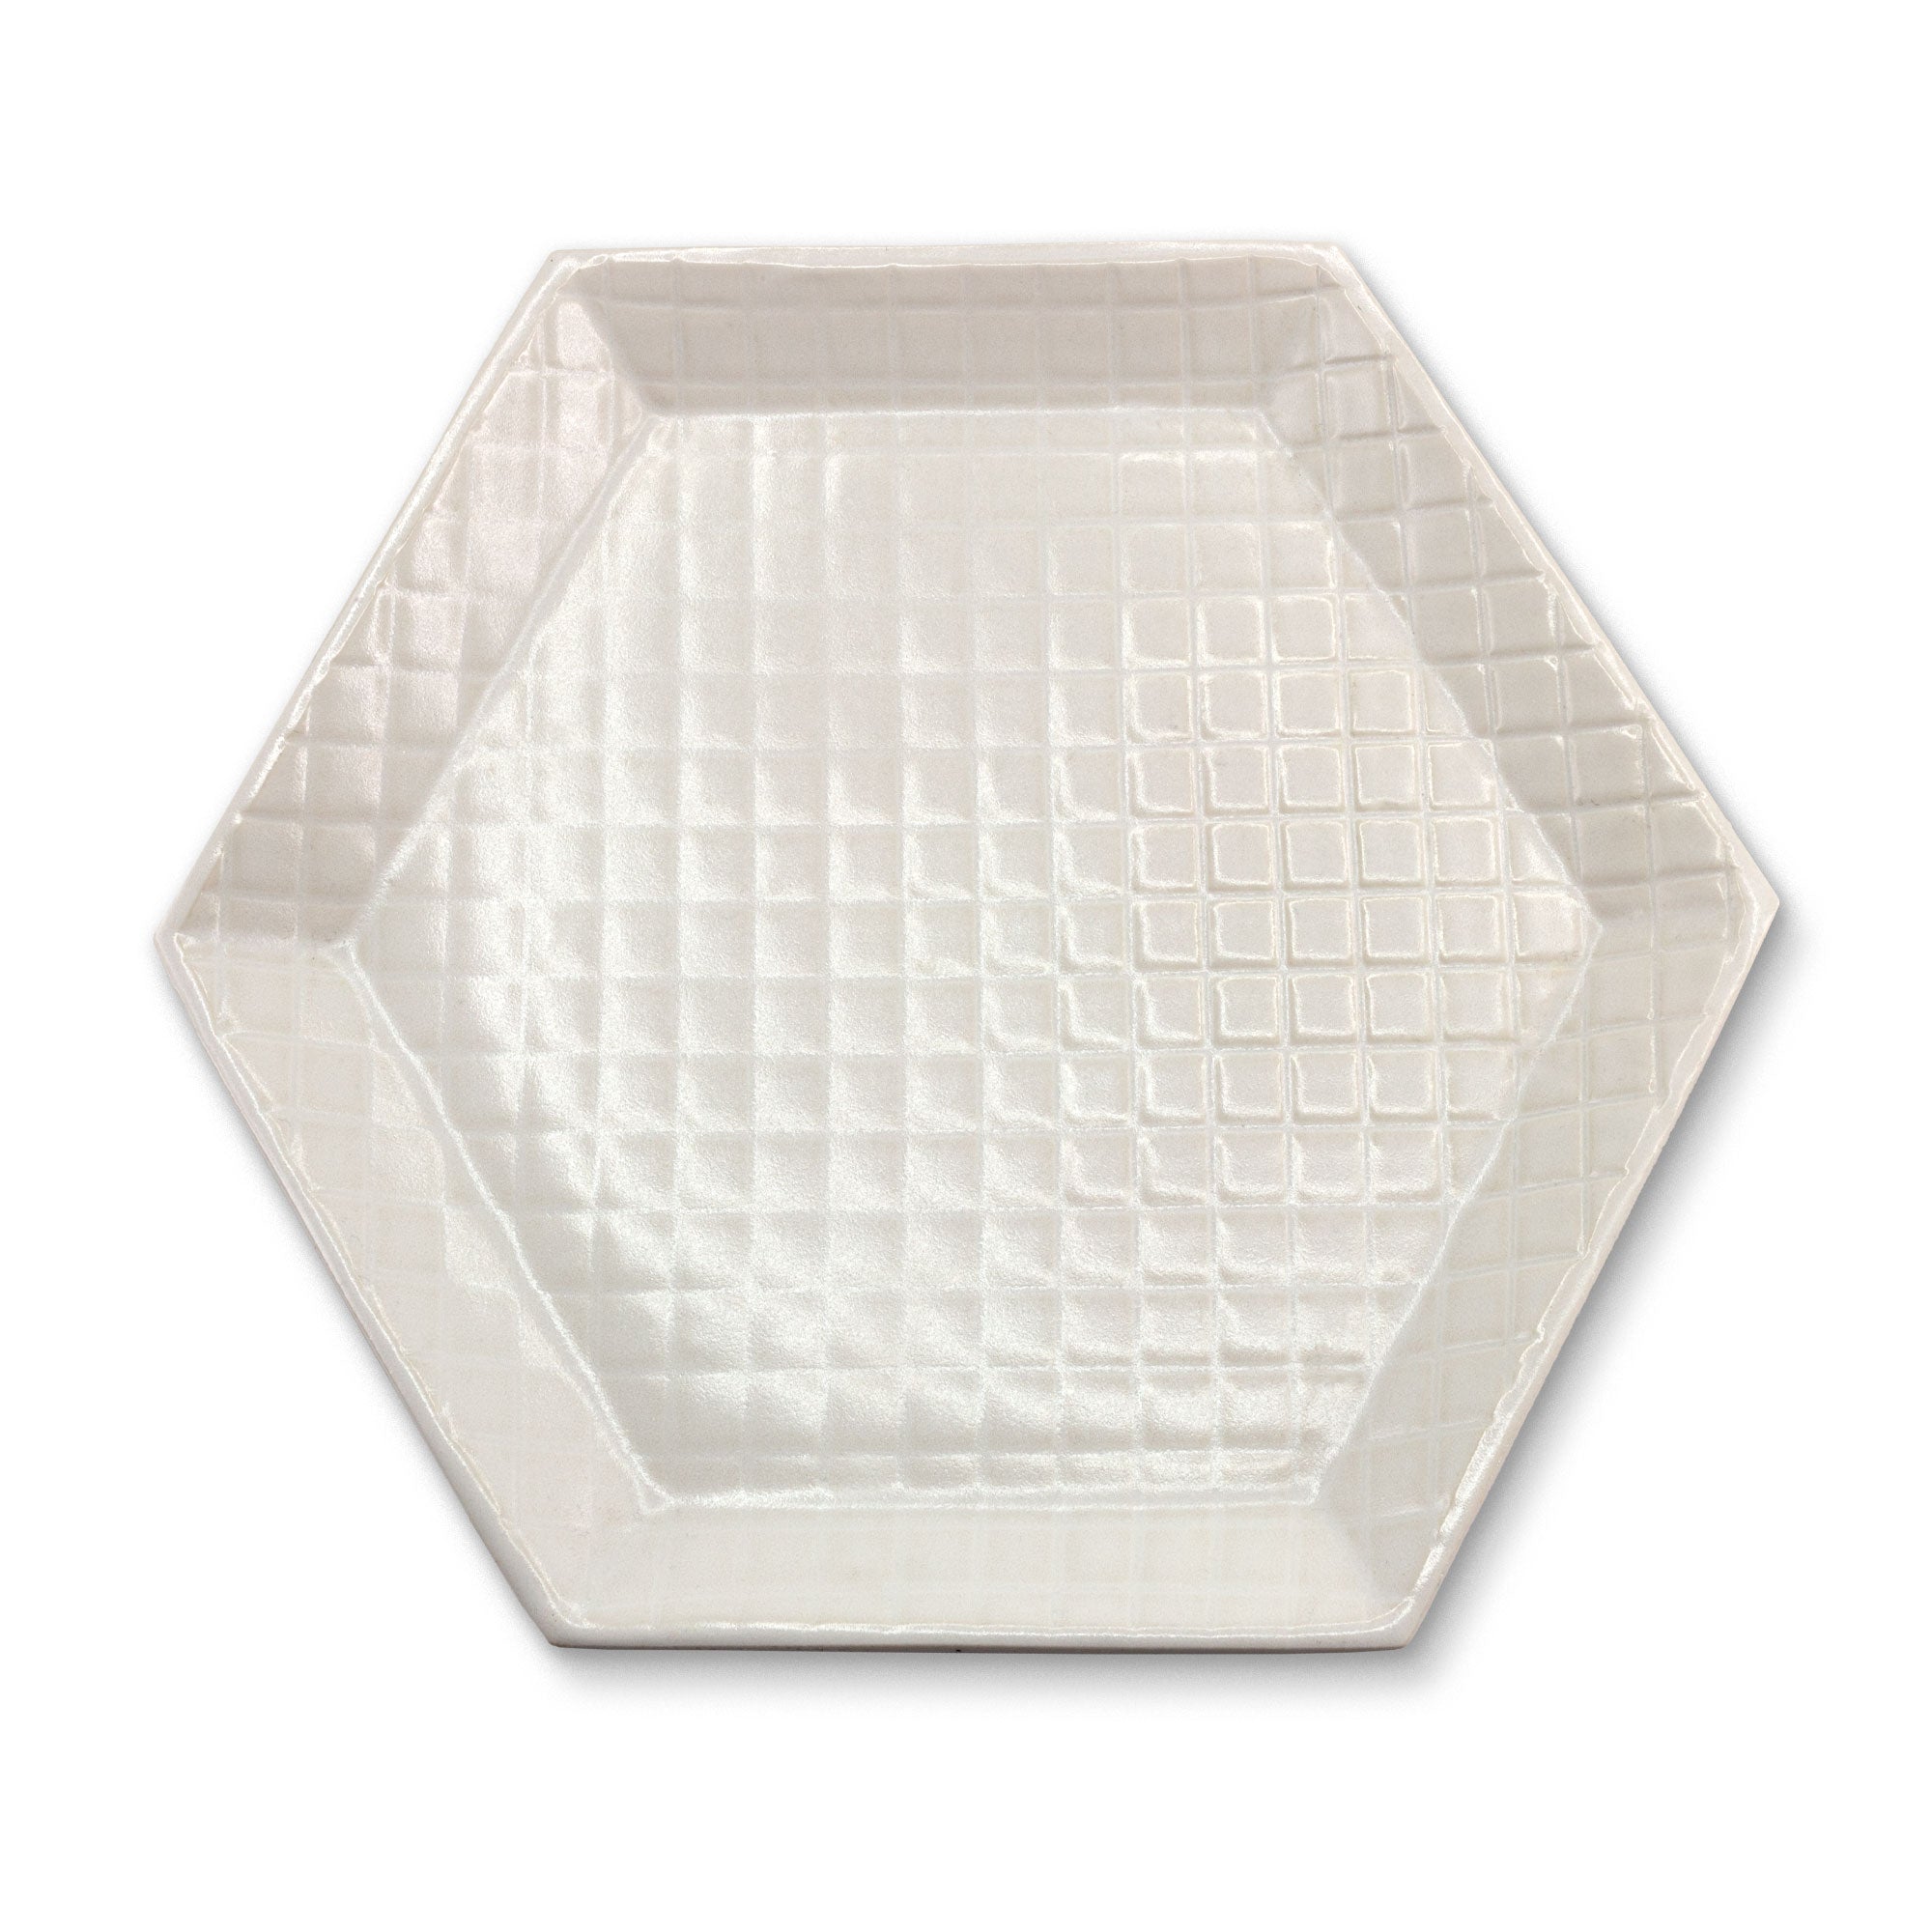 Convivial Productions - Gridded Hexagon Dinner Plate